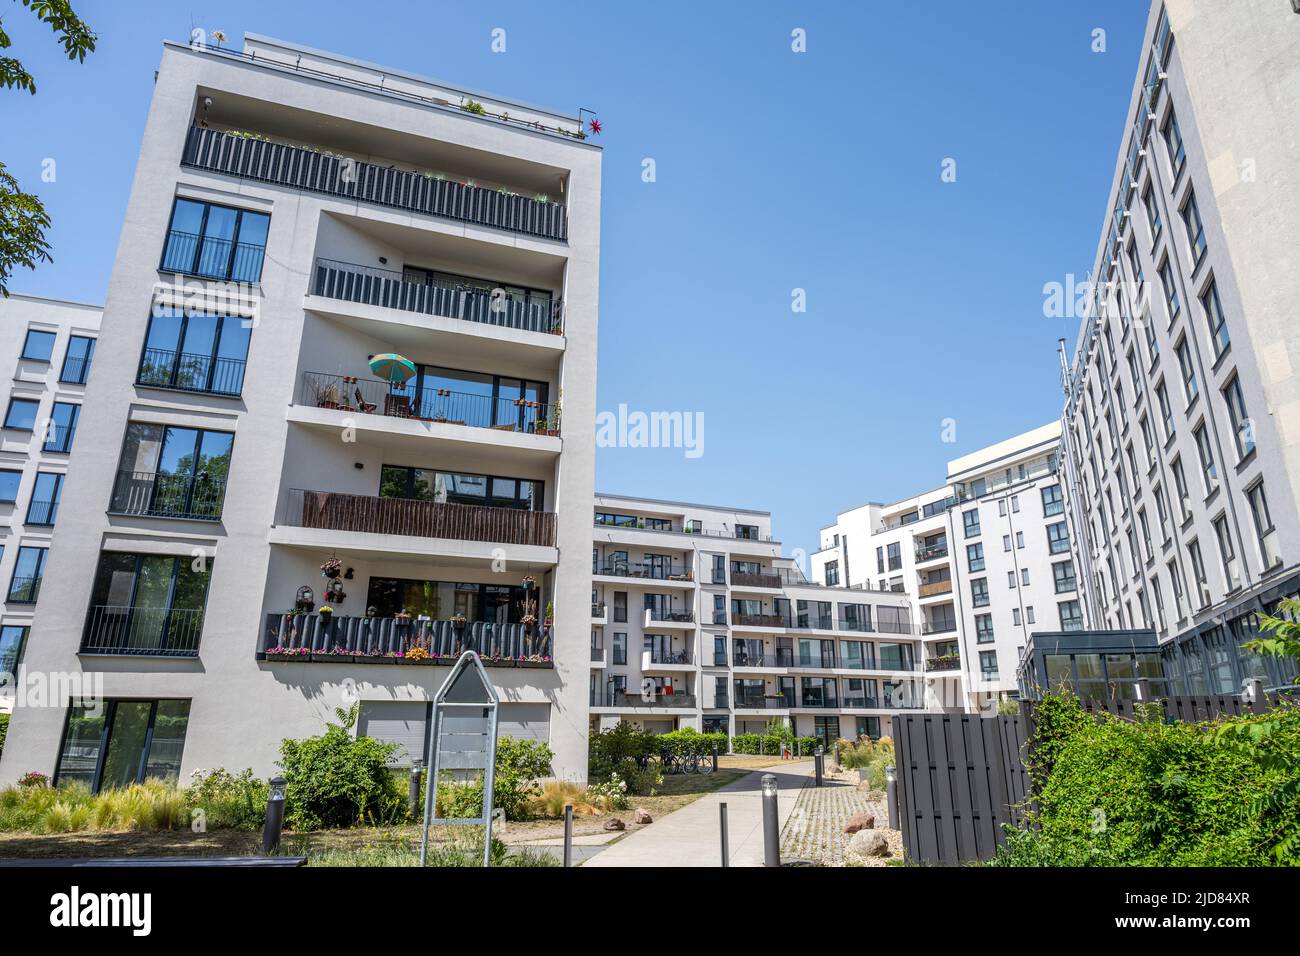 New apartment buildings in a housing development area in Berlin, Germany Stock Photo